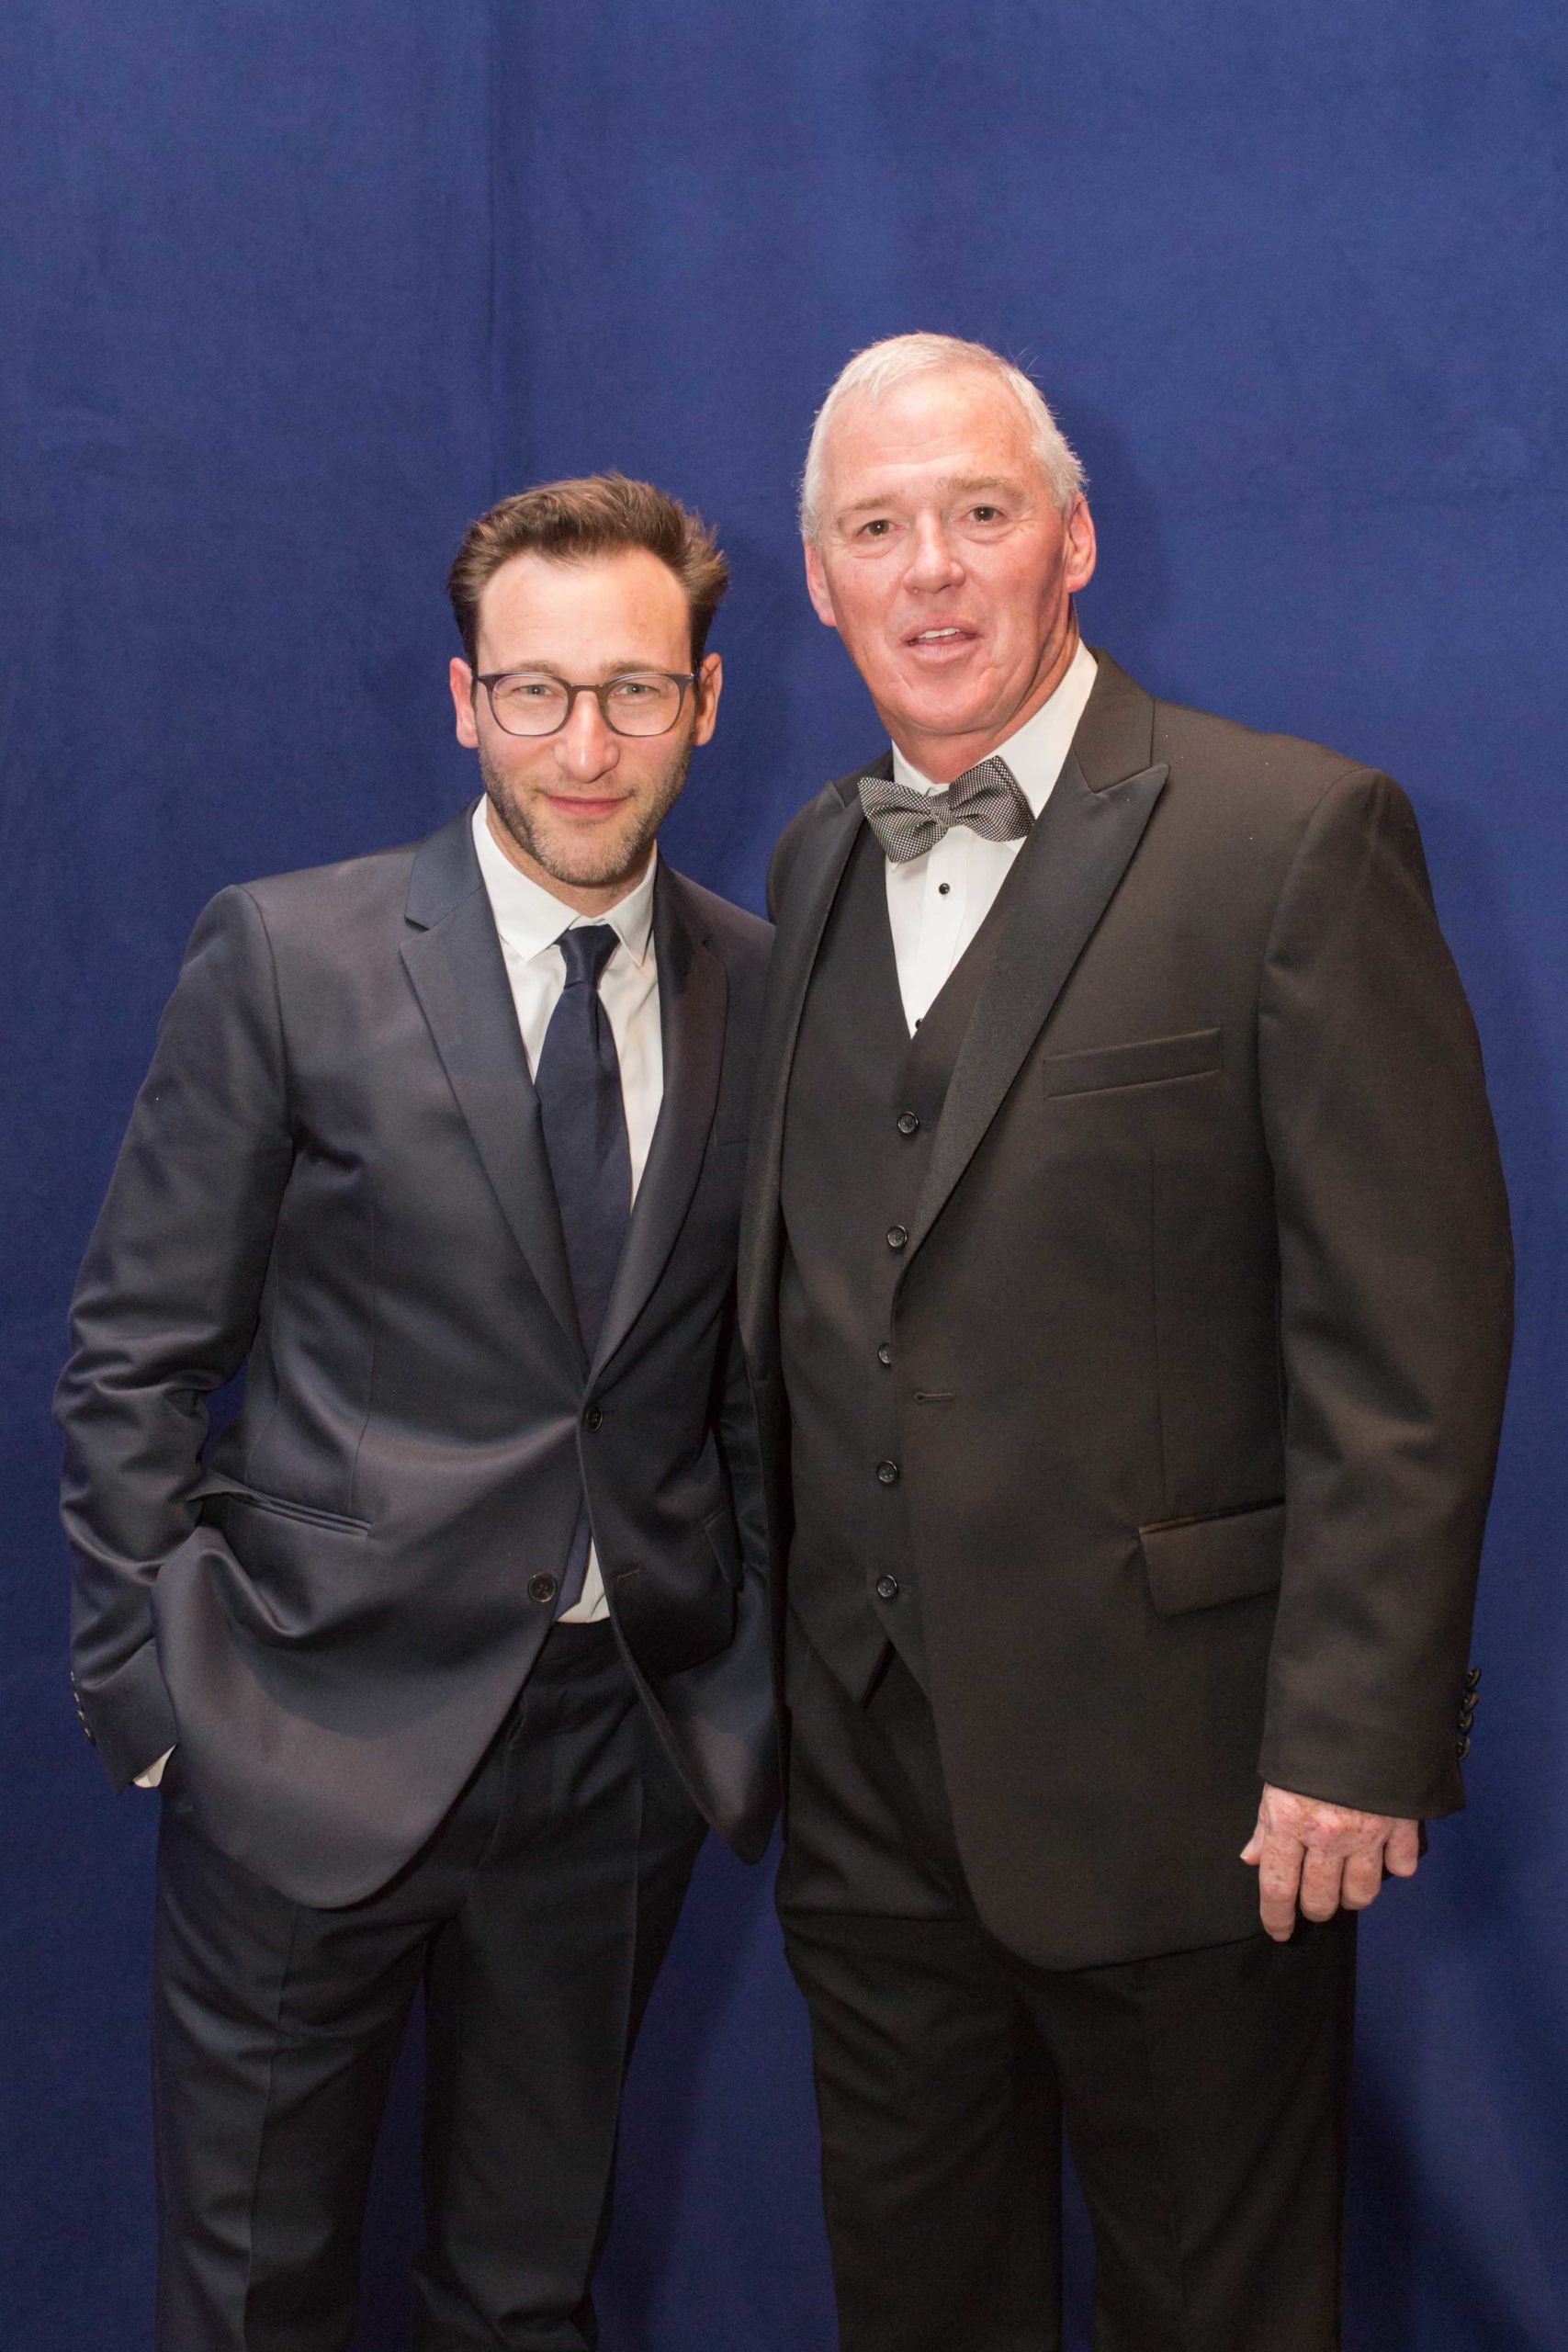 CEO and founder of City of Refuge and Author Simon Sinek at City of Refuge Atlanta's Gathering 20th anniversary at the Georgia Aquarium